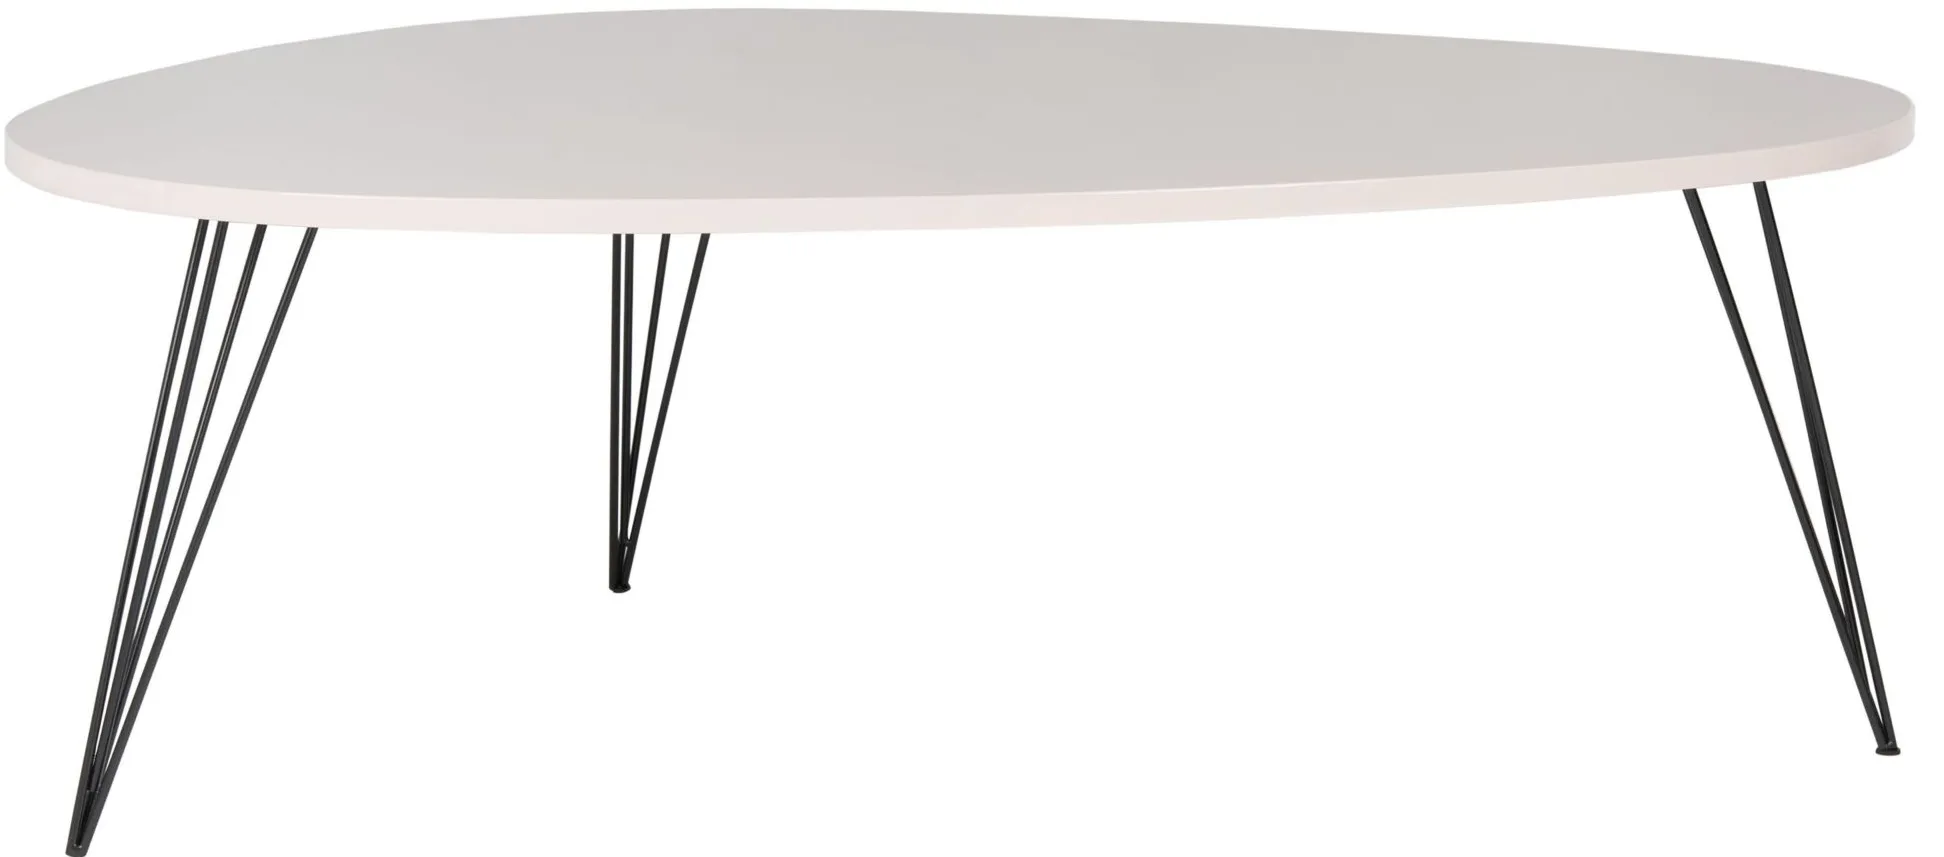 Werner Coffee Table in Taupe by Safavieh